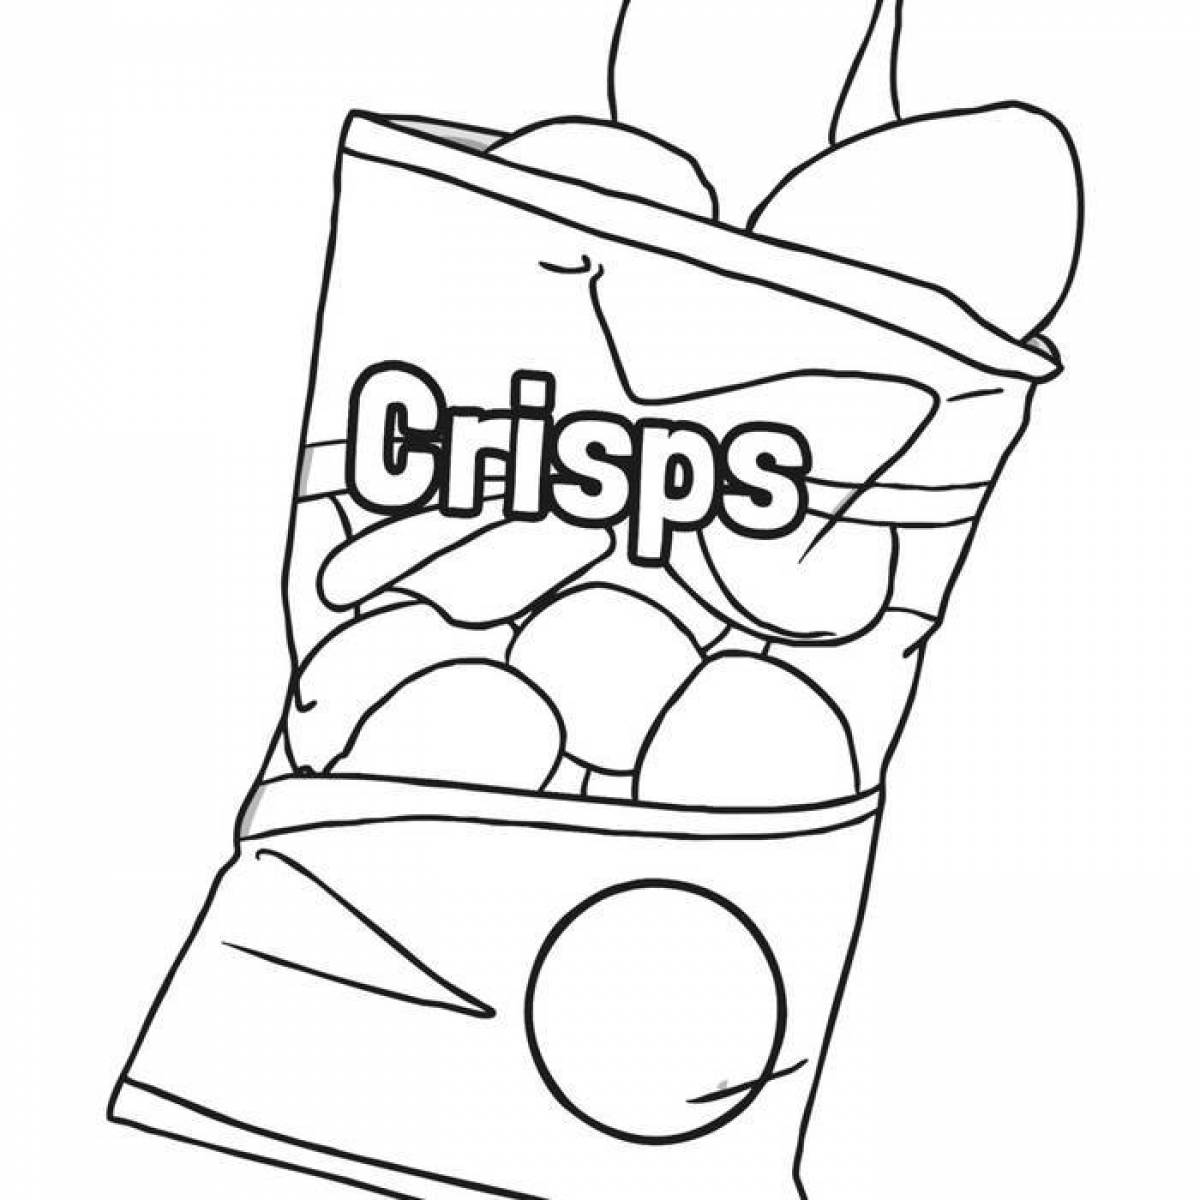 Crazy chips coloring page